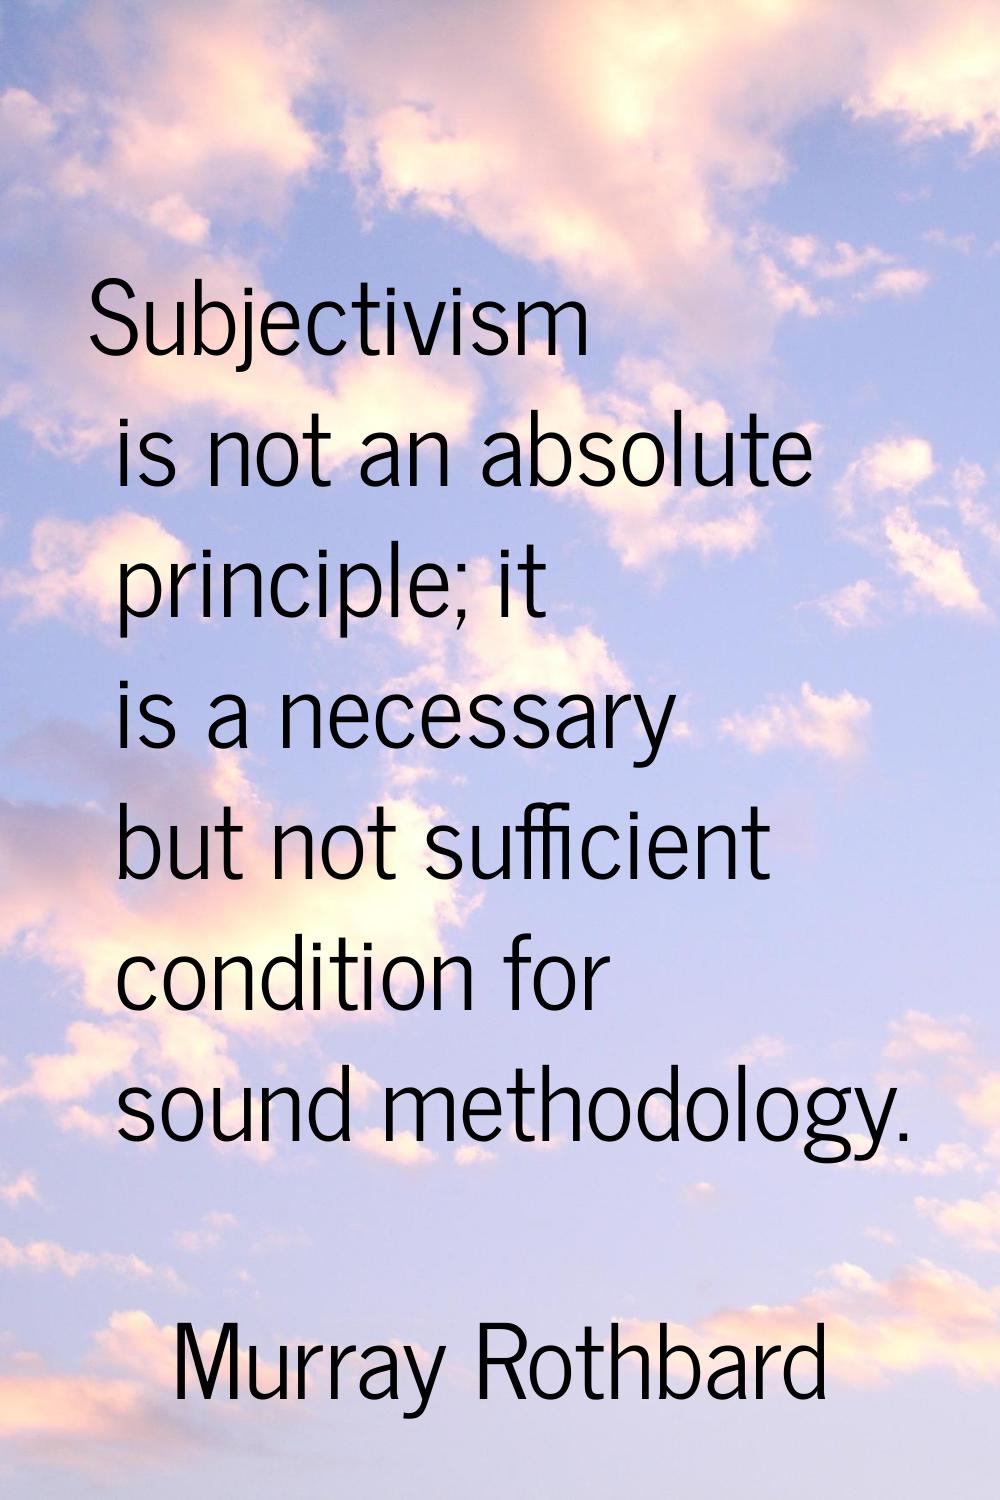 Subjectivism is not an absolute principle; it is a necessary but not sufficient condition for sound